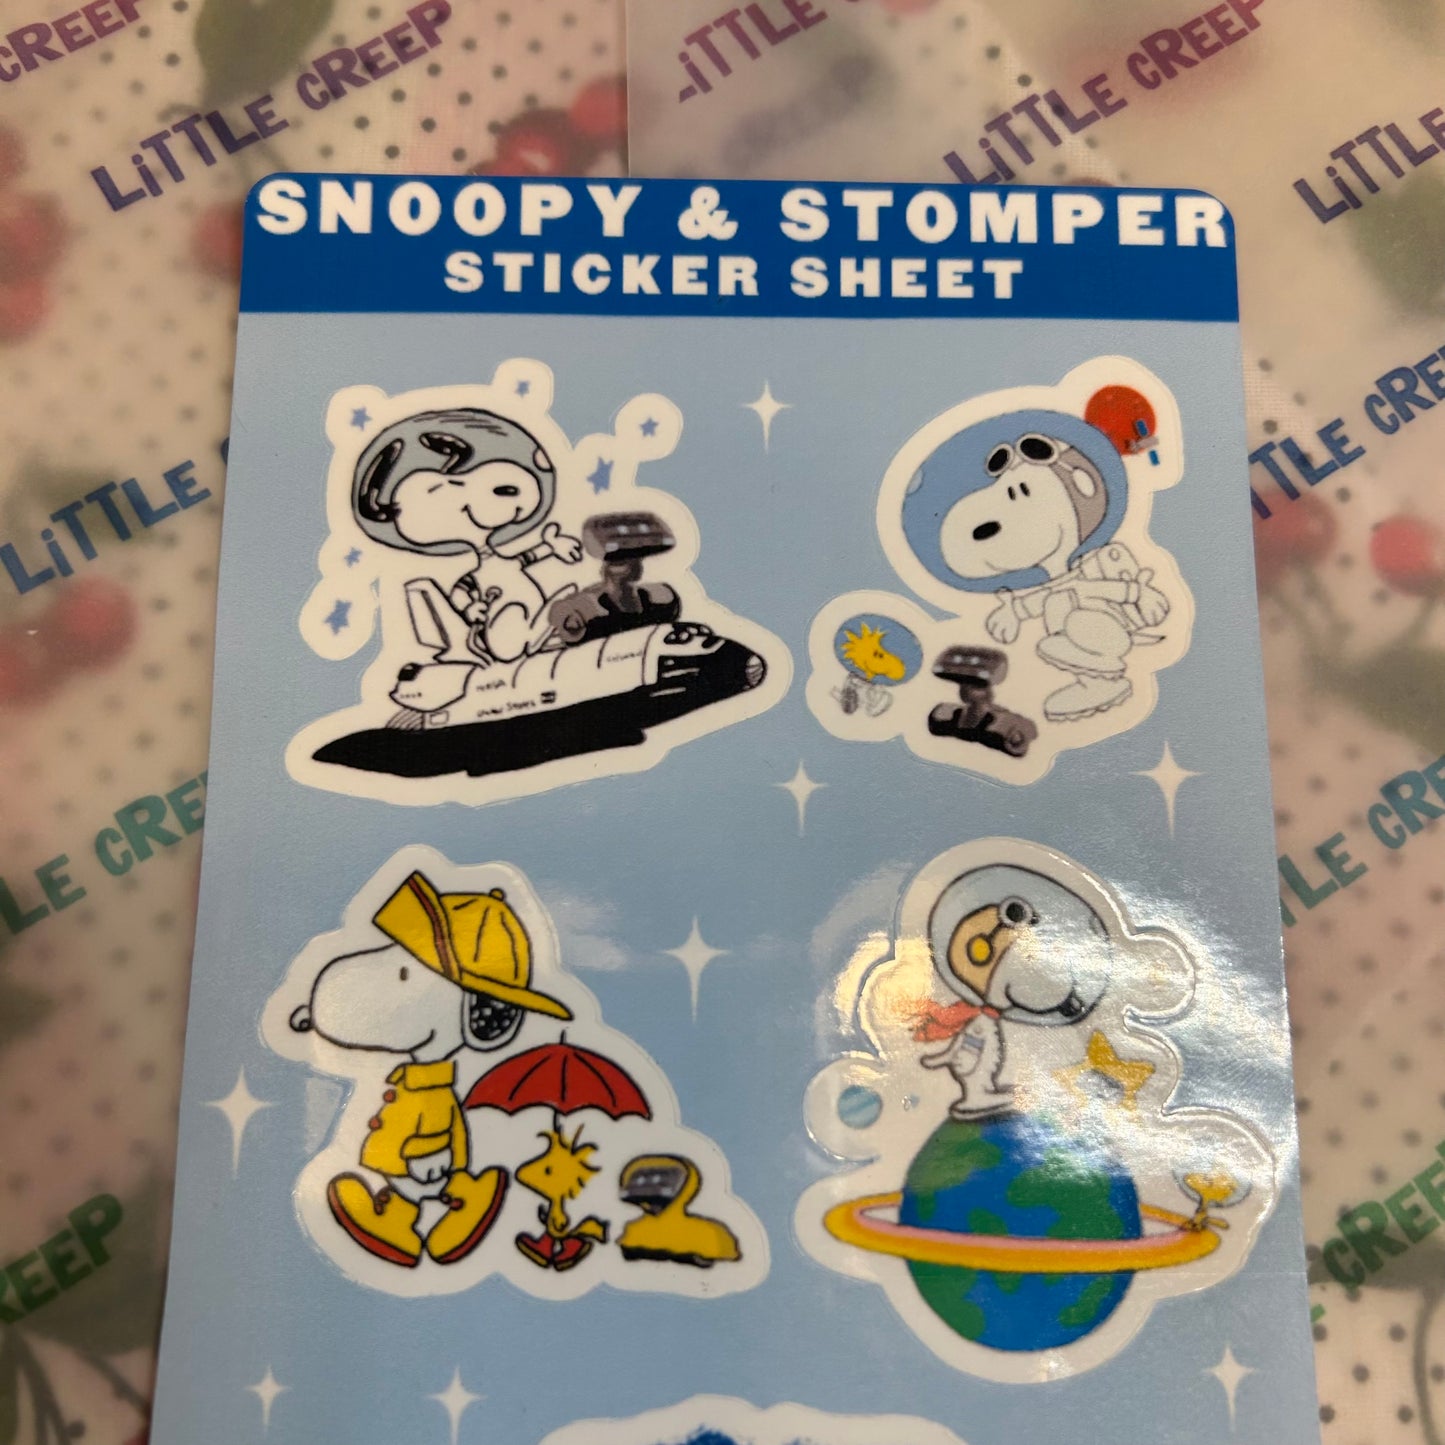 Snoopy and Stomper Sticker Sheet